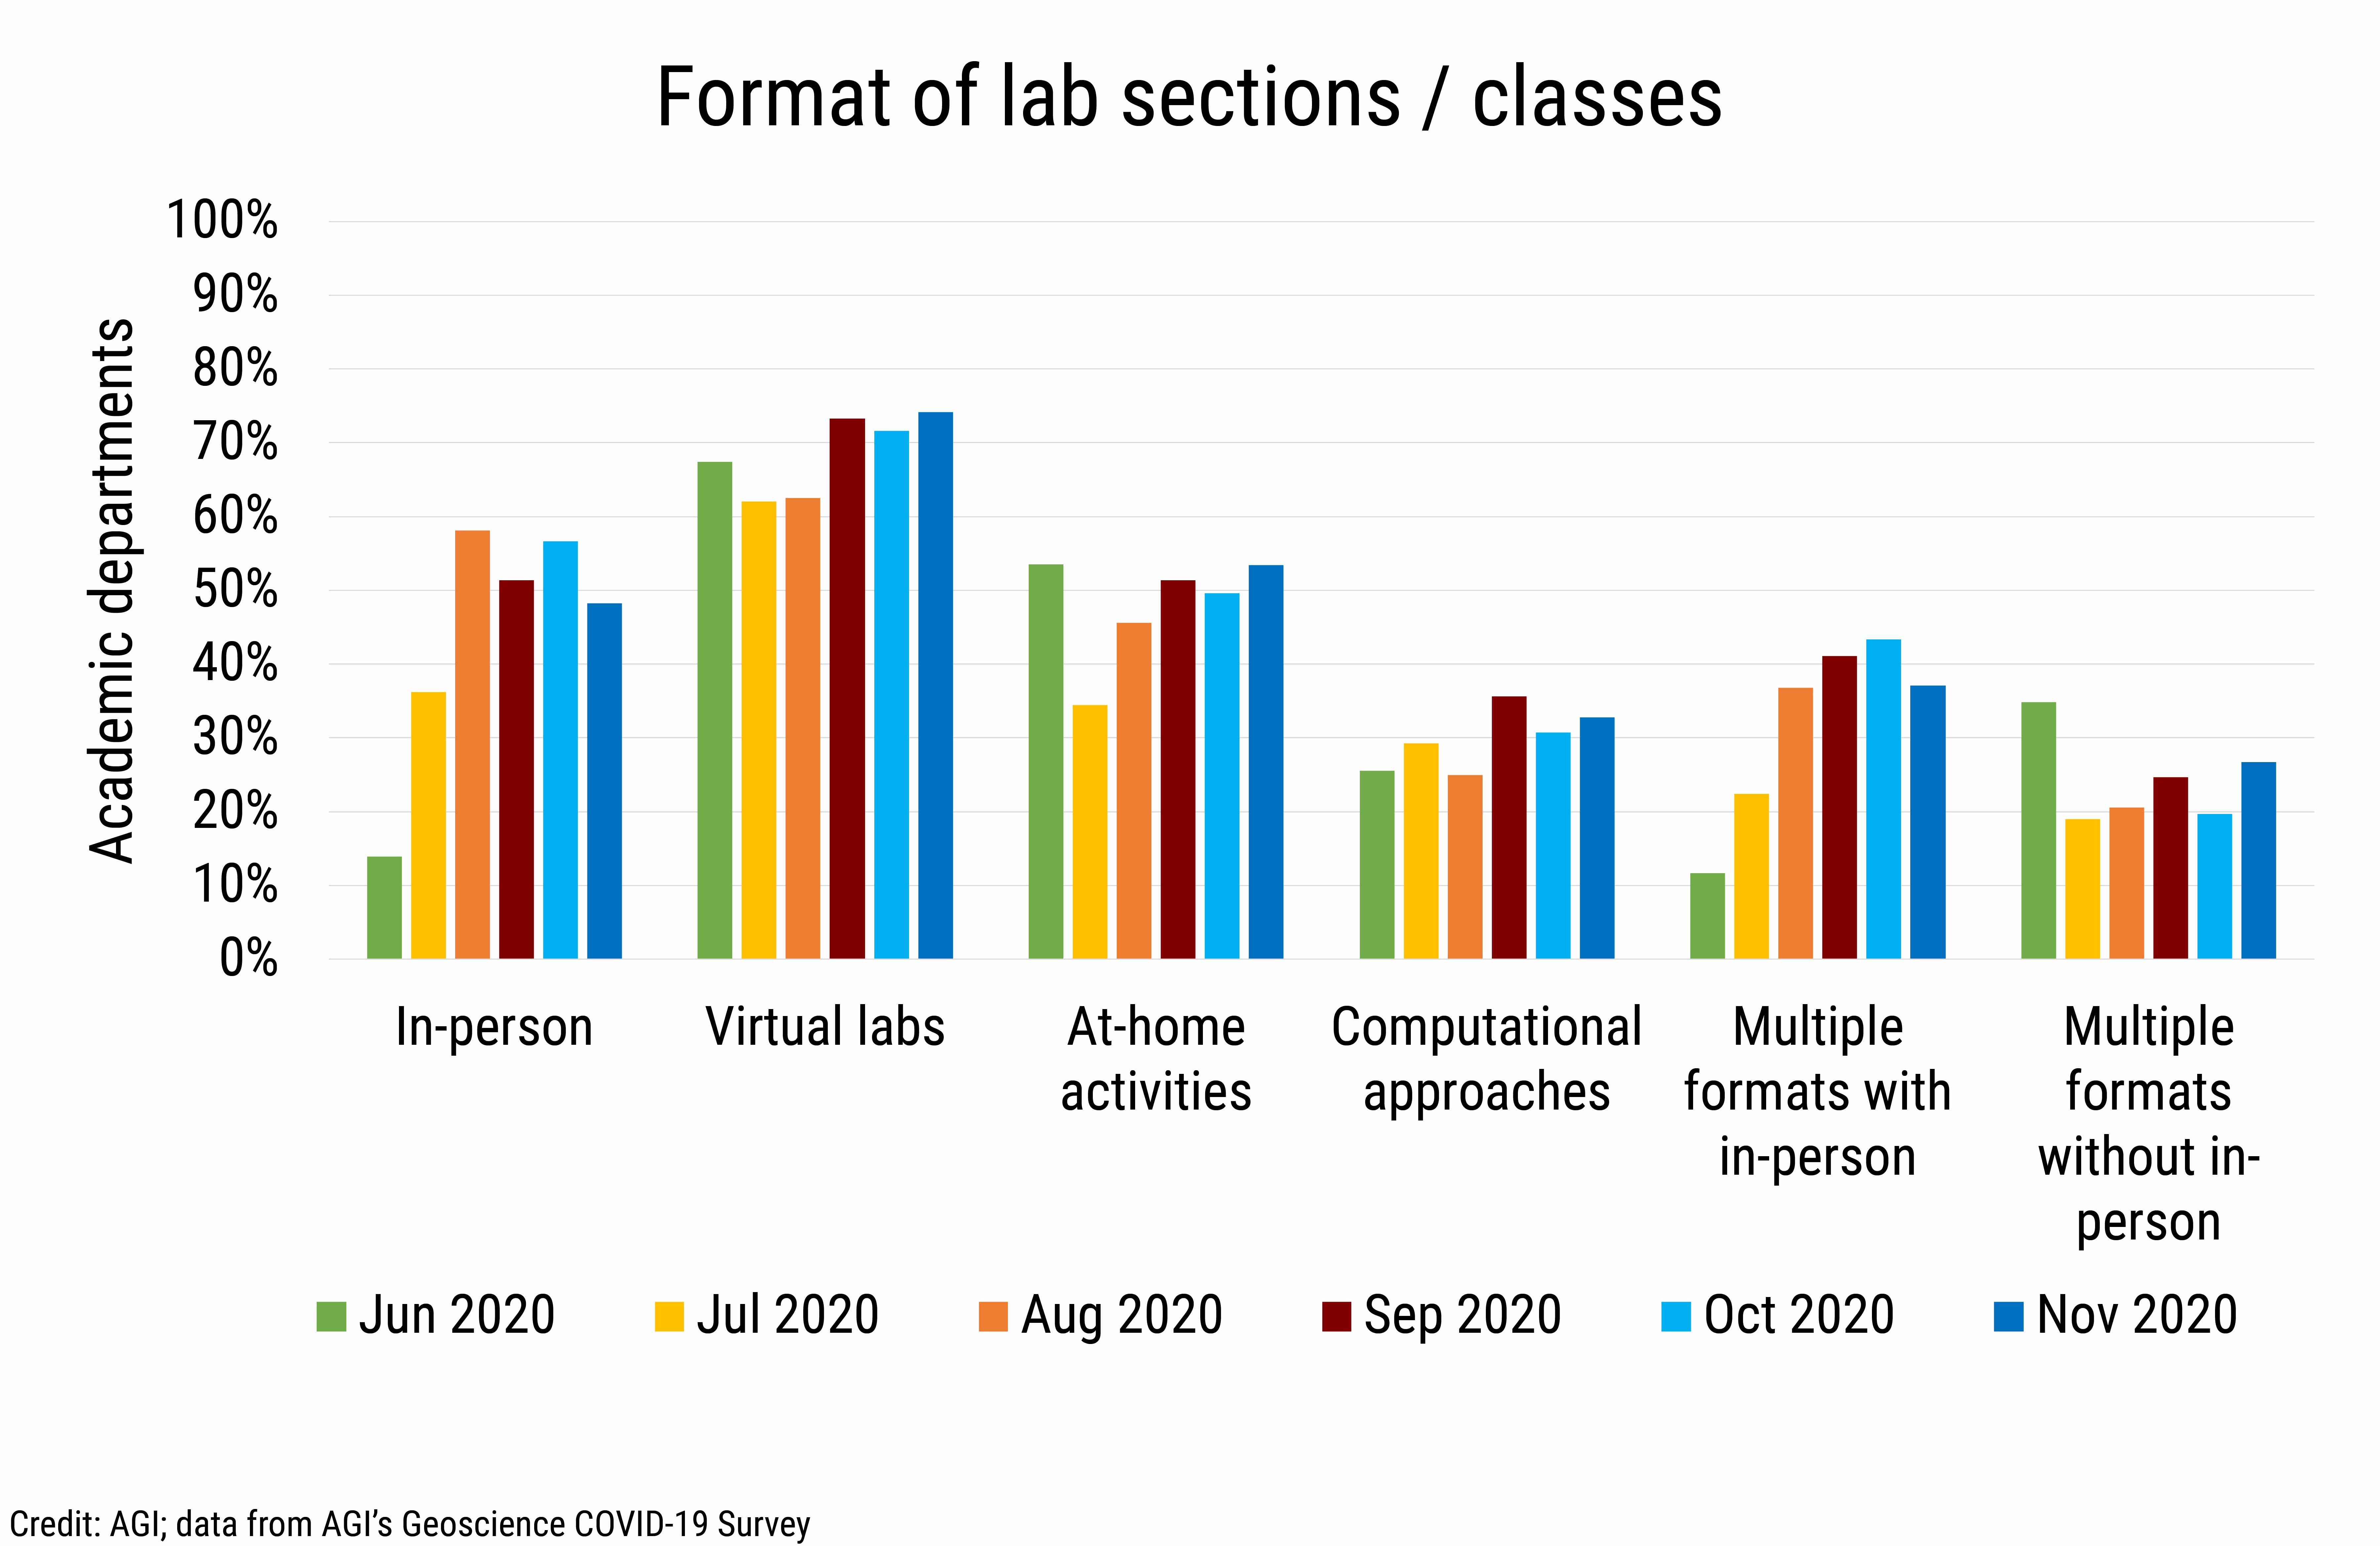 DB_2020-031 chart08 Format of lab sections classes (Credit: AGI; data from AGI's Geoscience COVID-19 Survey)